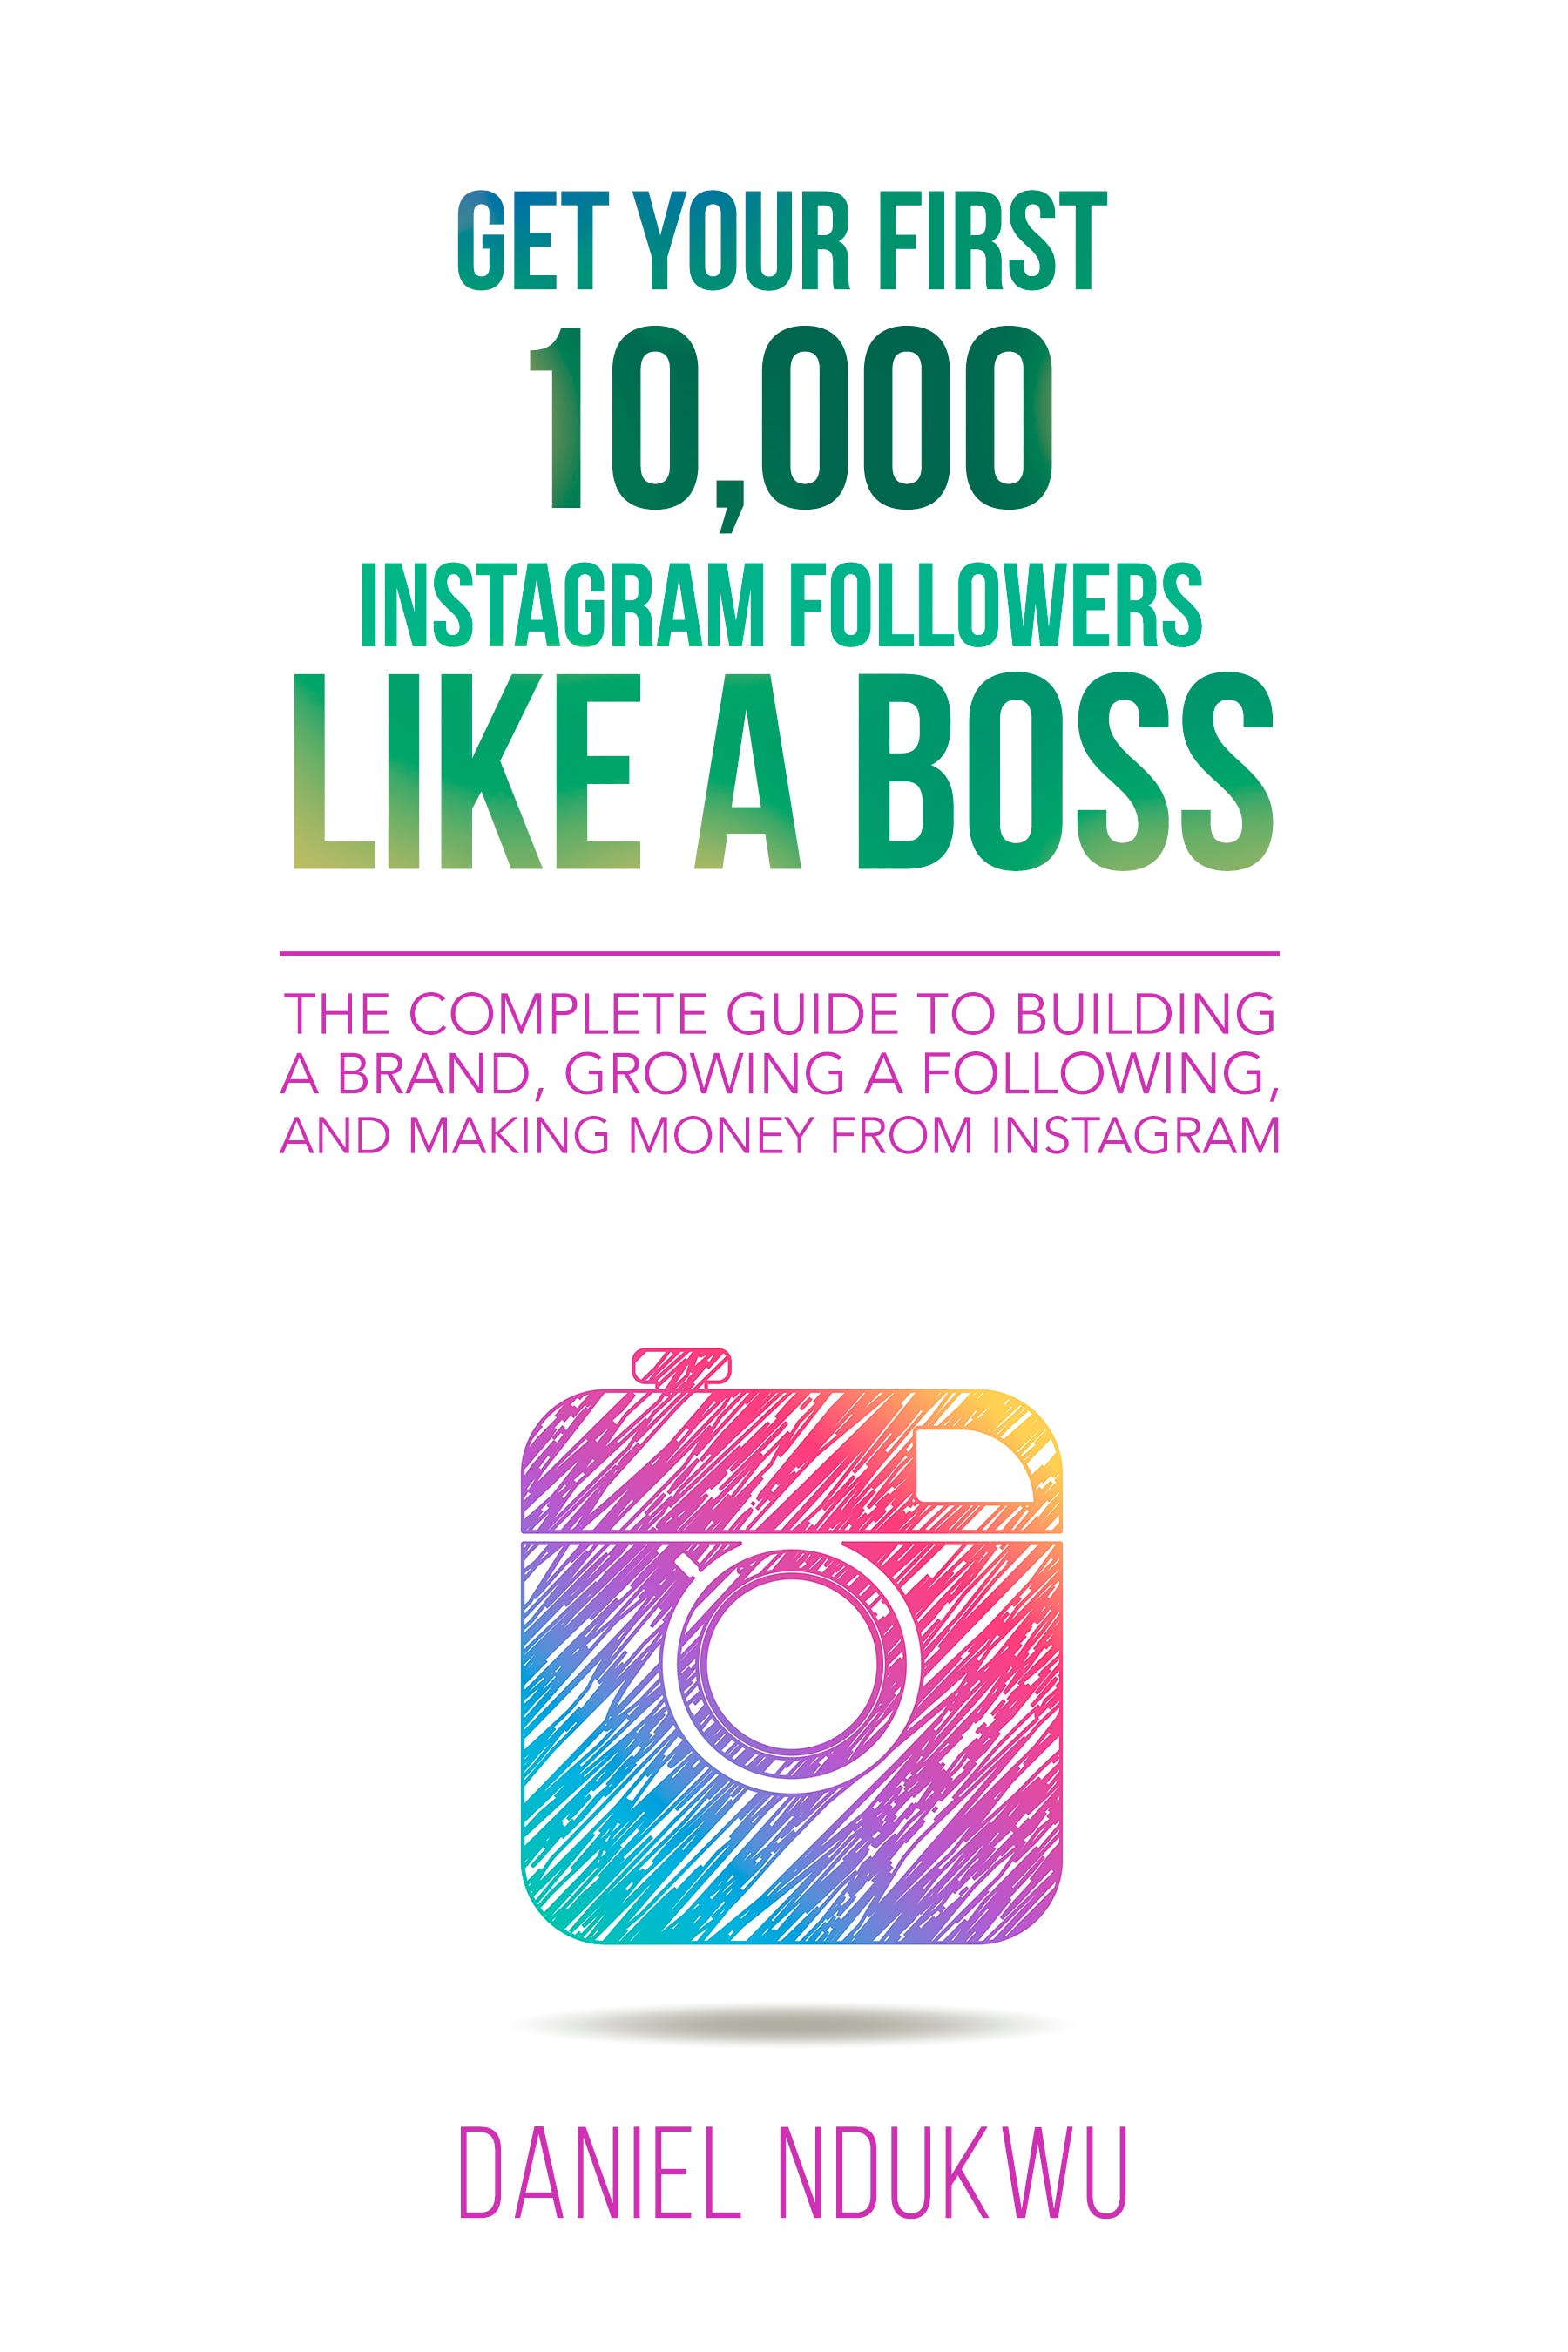 Get your First 10,000 Instagram Followers Like a Boss media 1